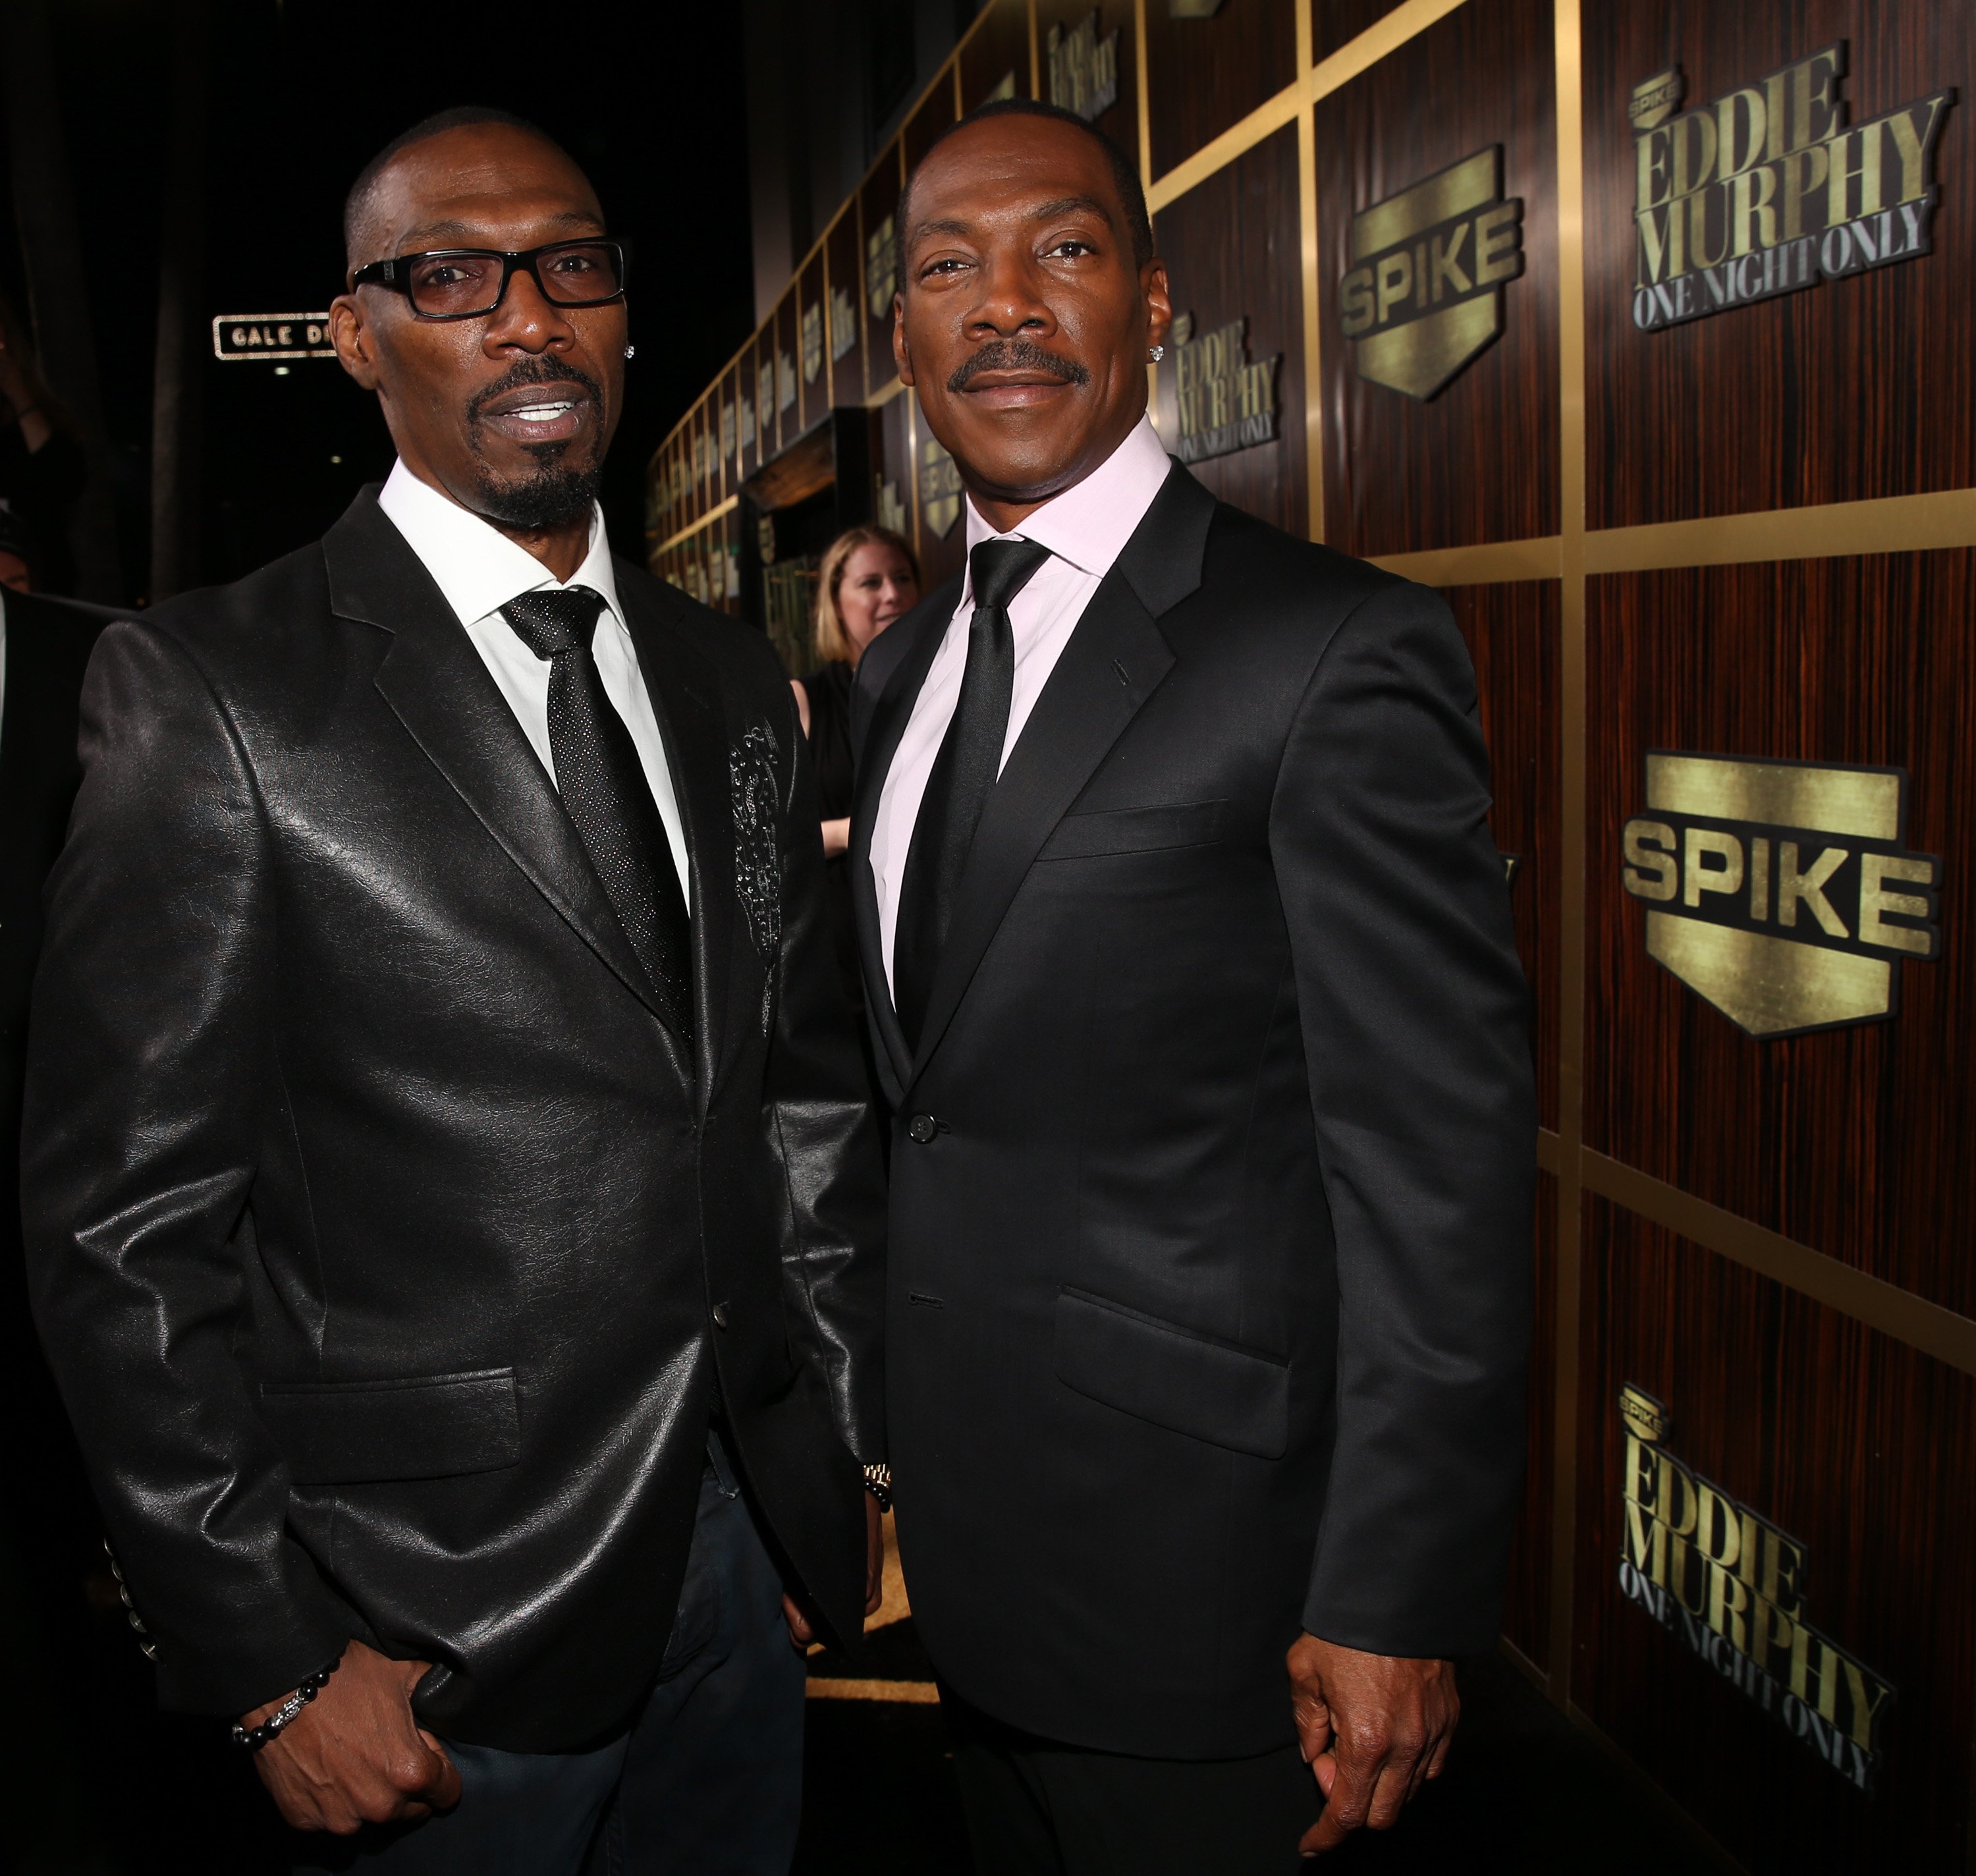 Charlie Murphy and Eddie Murphy arrive at Spike TV's "Eddie Murphy: One Night Only" at the Saban Theatre on November 3, 2012. | Photo: GettyImages